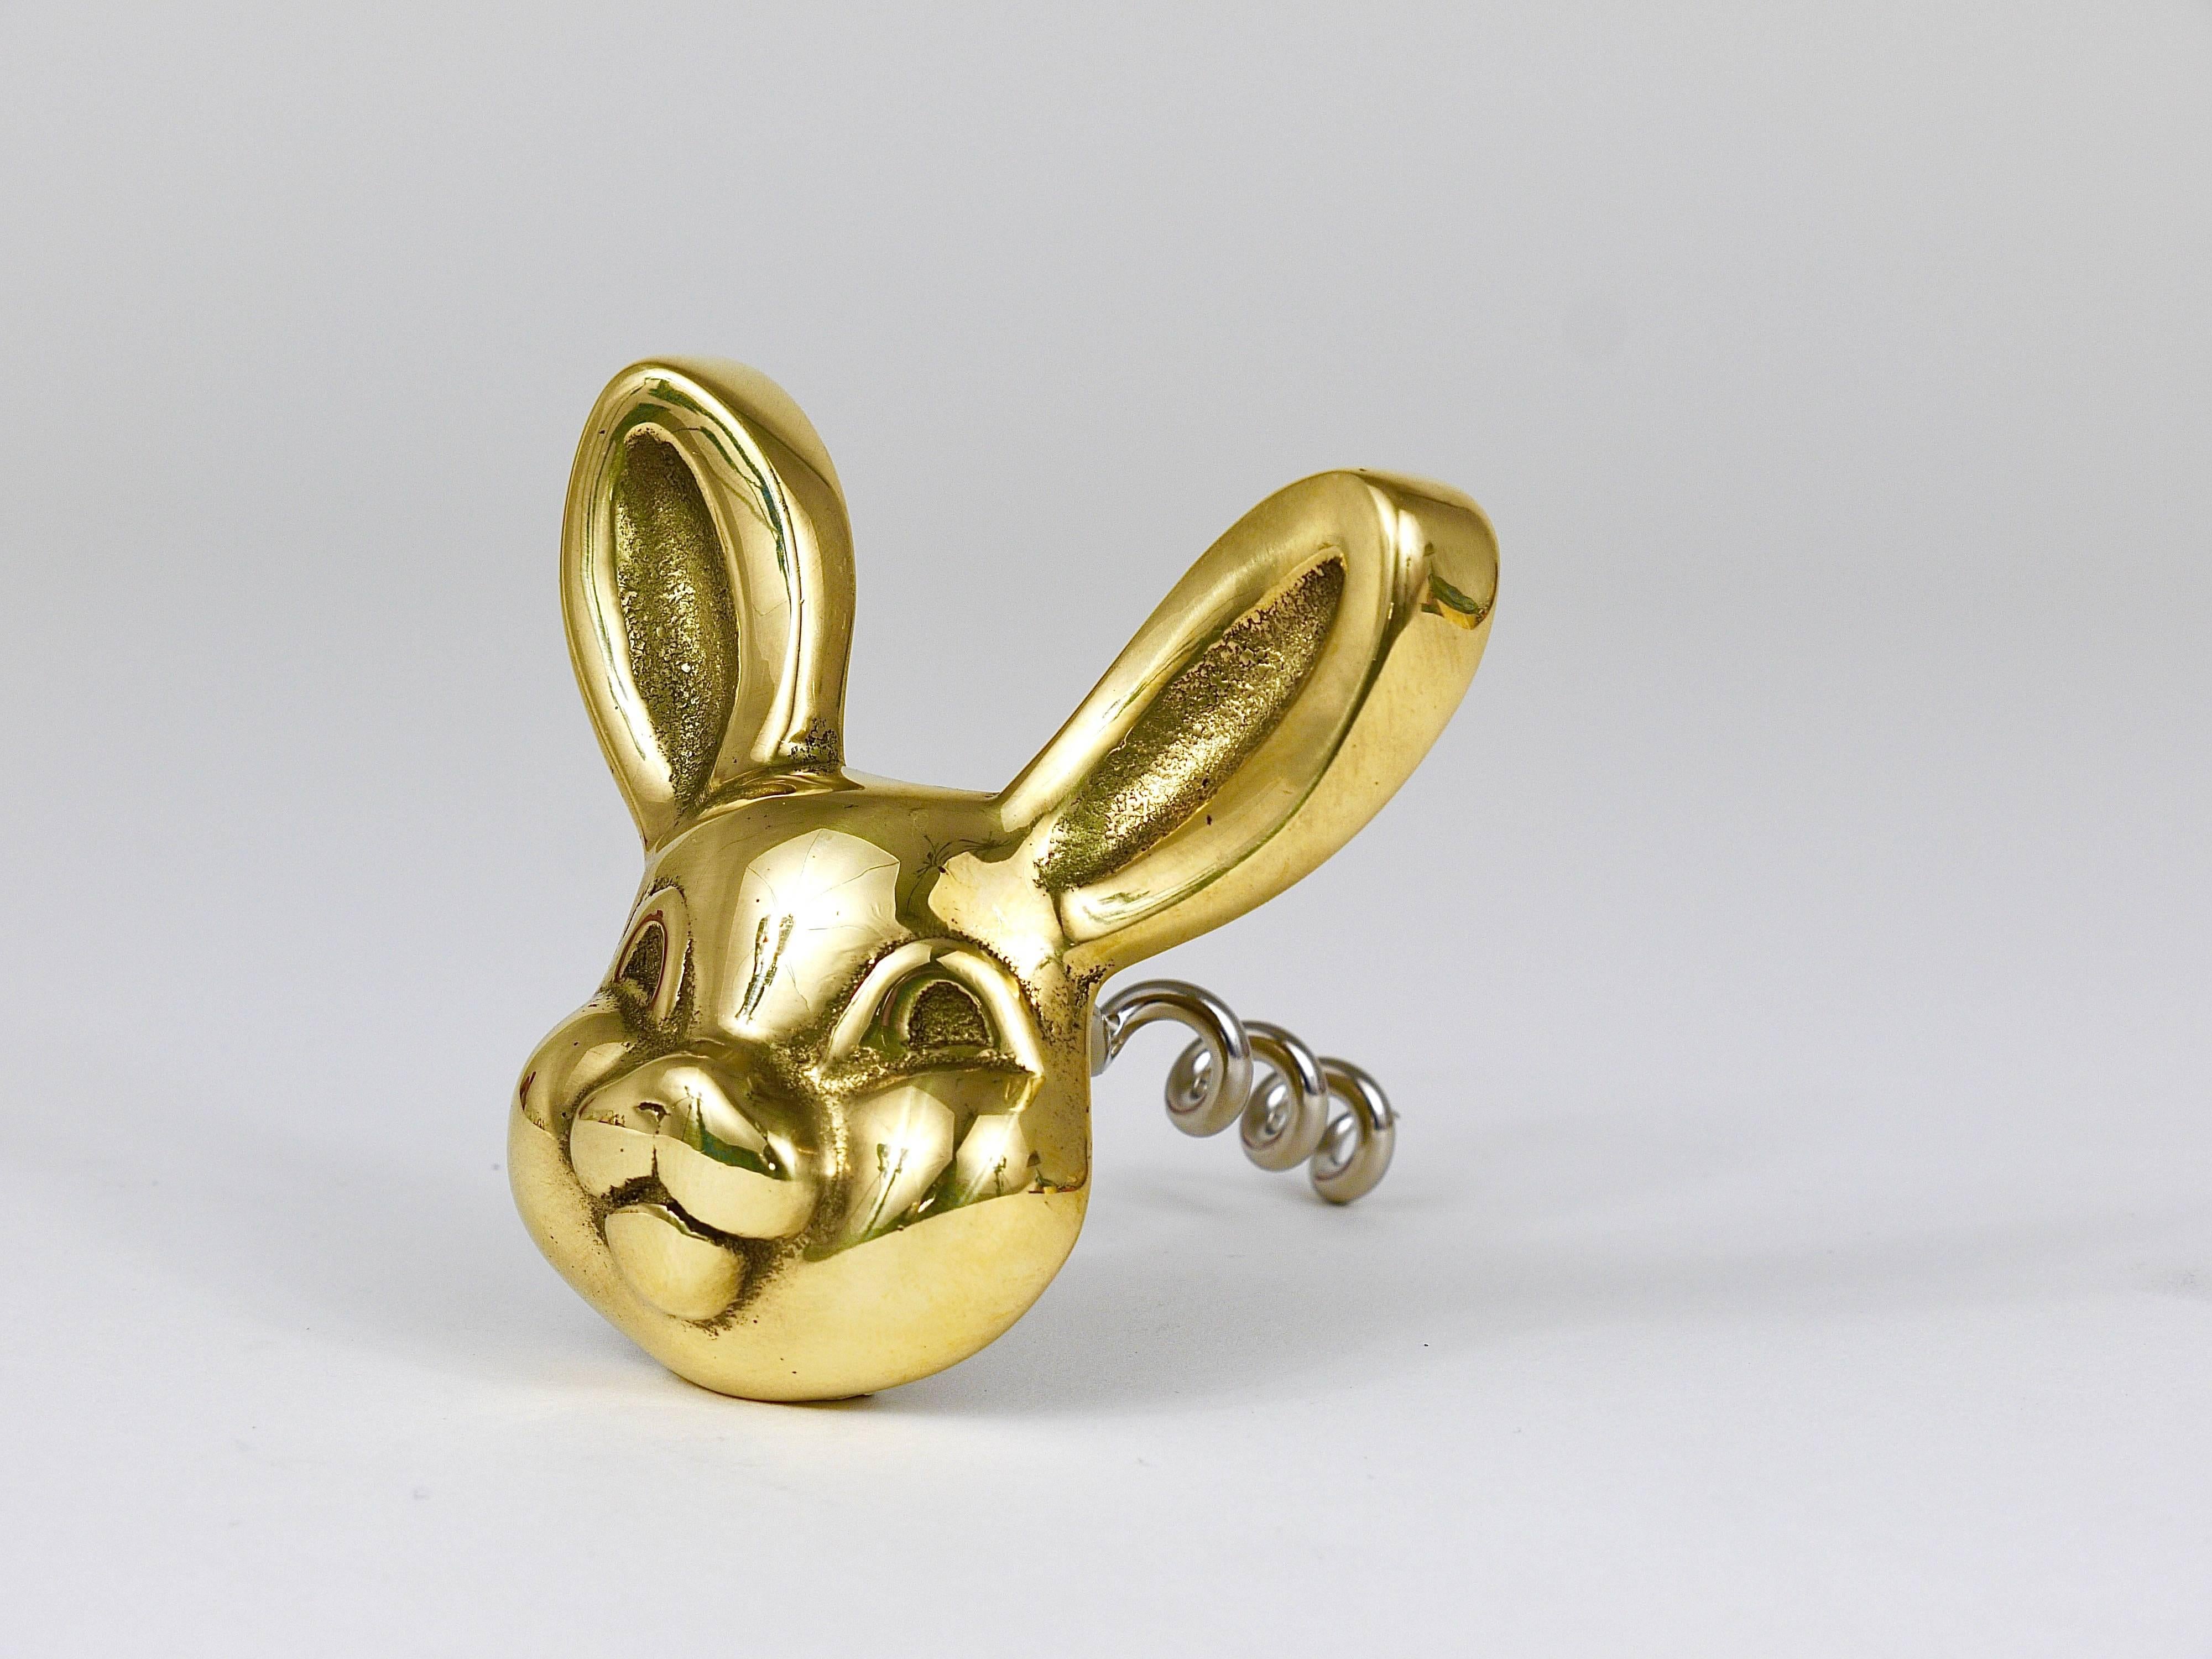 A charming Mid-Century bottle opener / cork screw, displaying a rabbit. A humorous design by Walter Bosse, executed by Hertha Baller Austria in the 1950s. Made of polished brass, in very good condition.